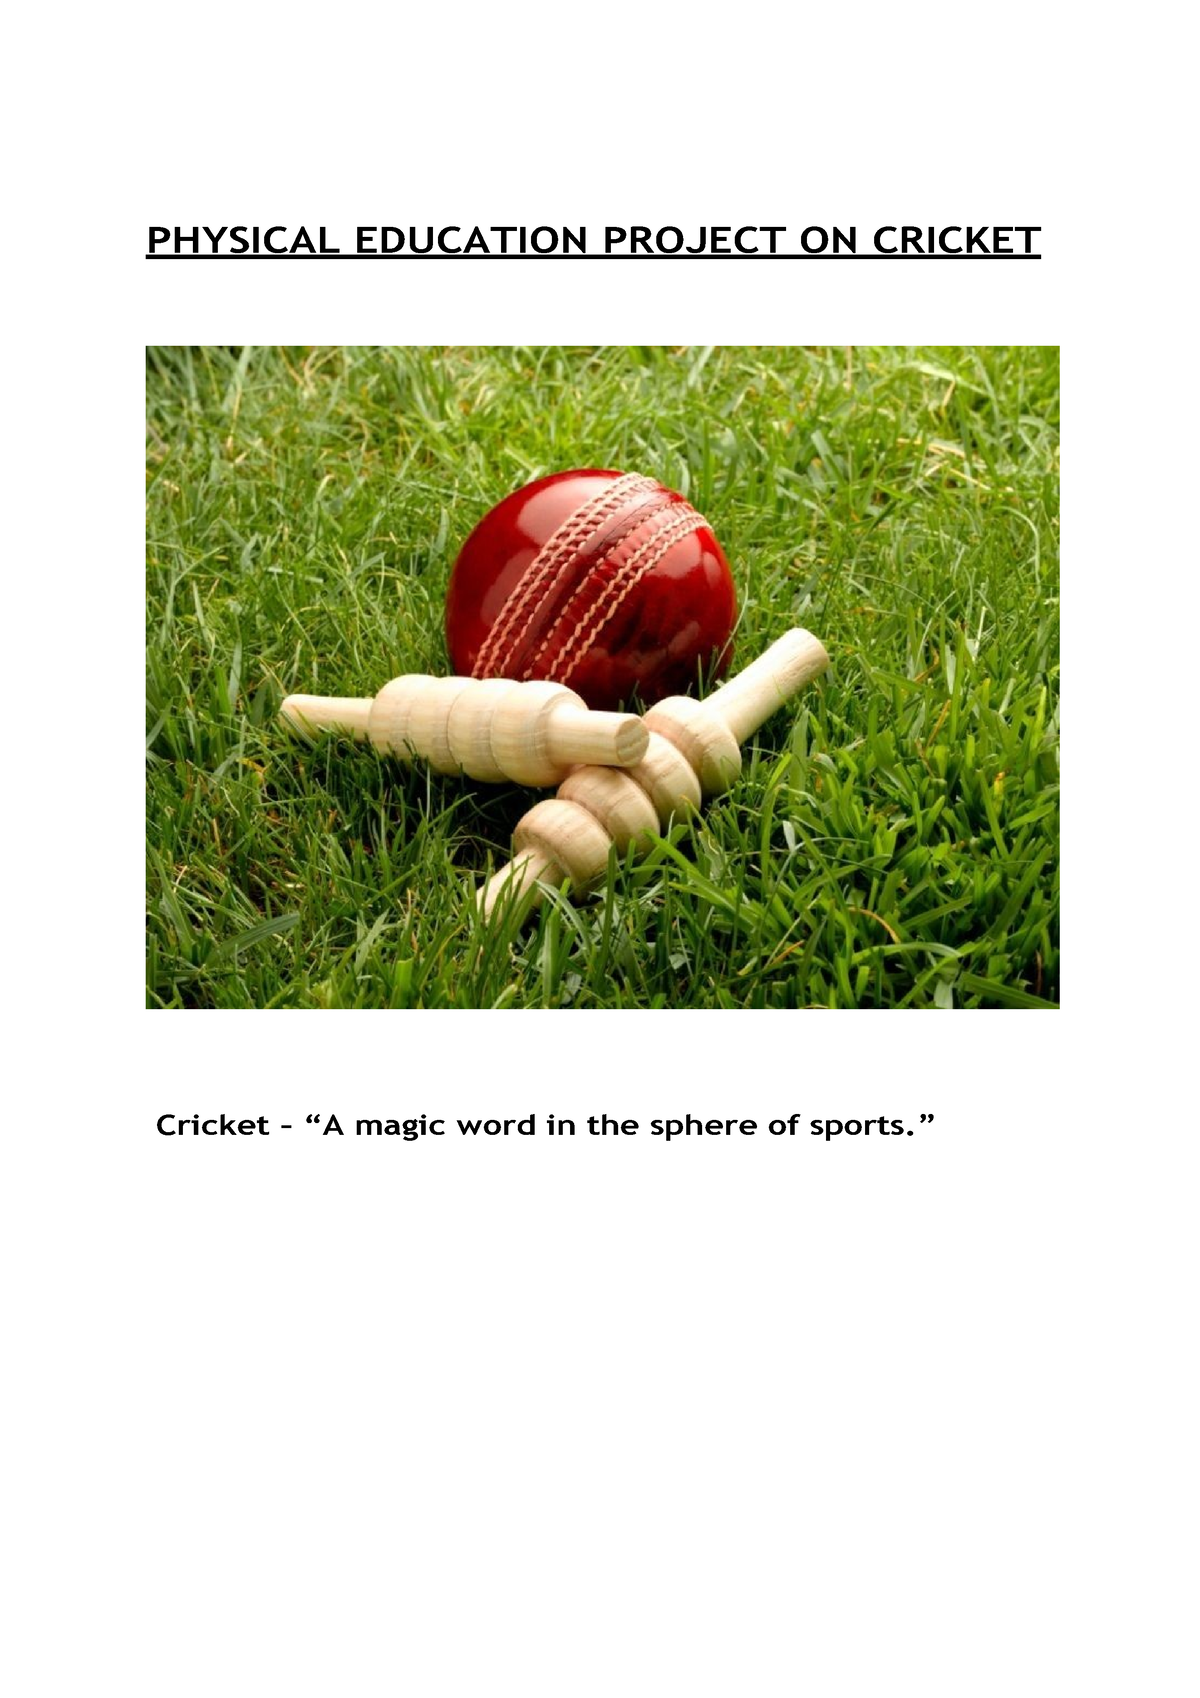 physical education project on cricket in marathi pdf